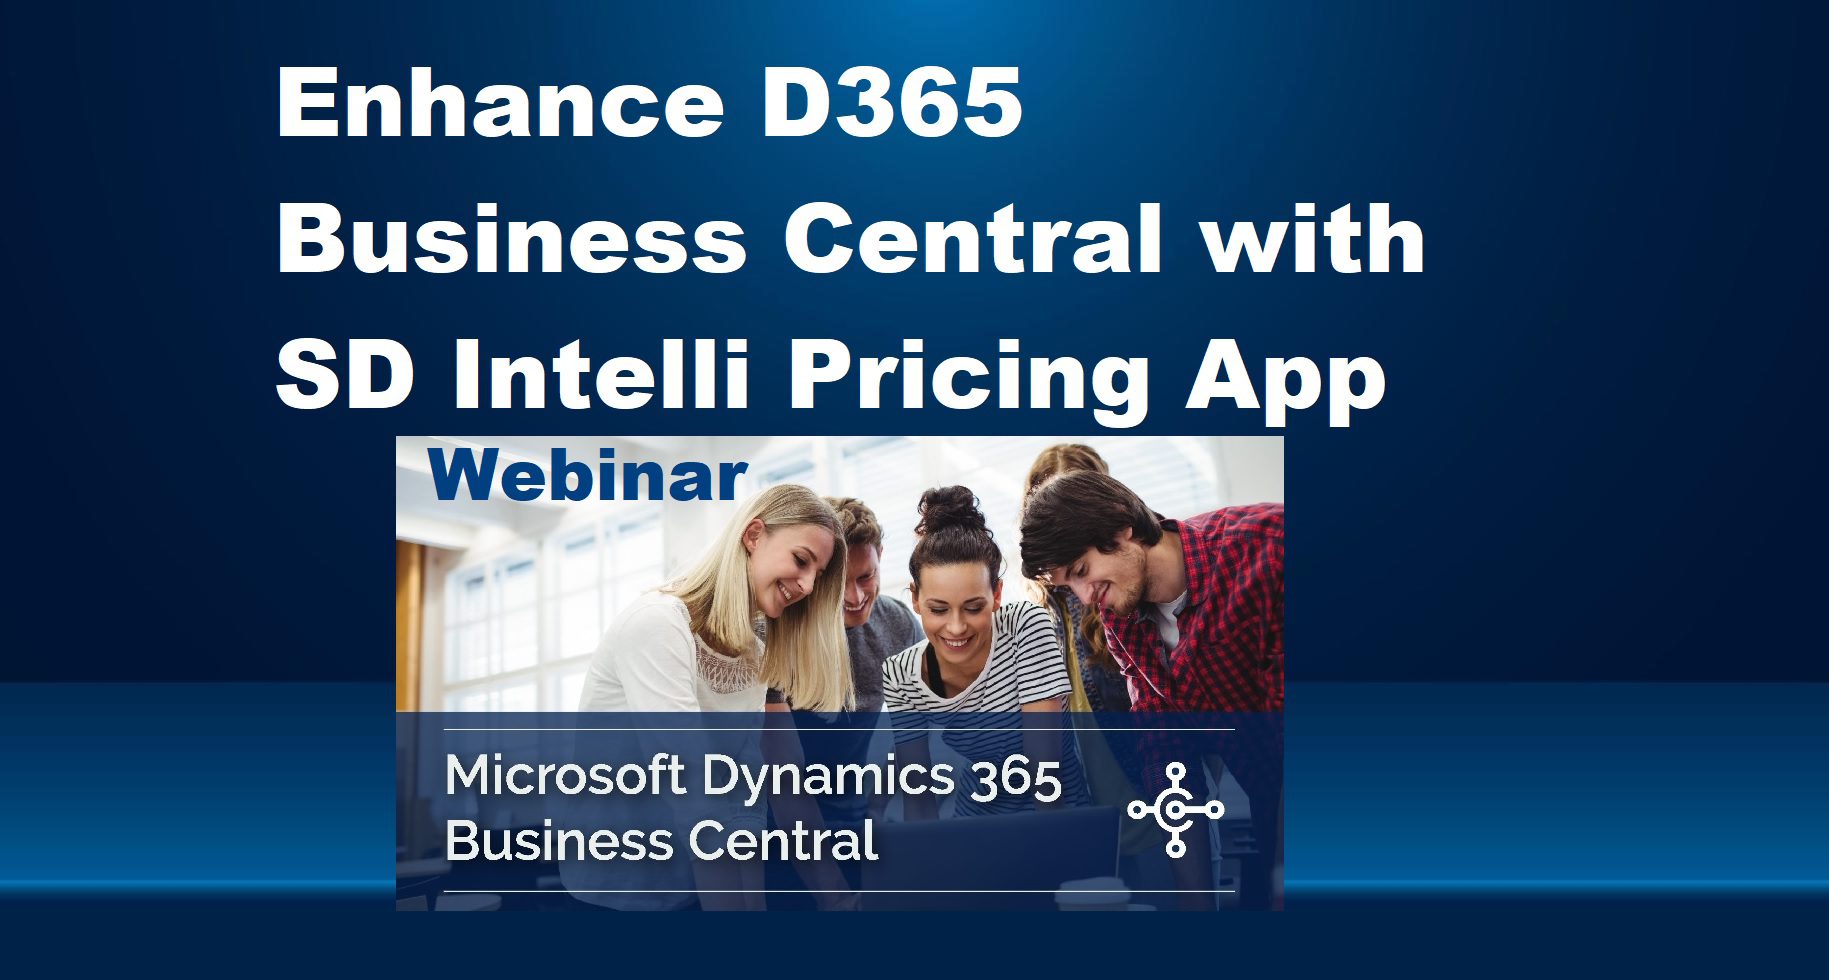 SD Intelli Pricing App for D365 Business Central Webinar